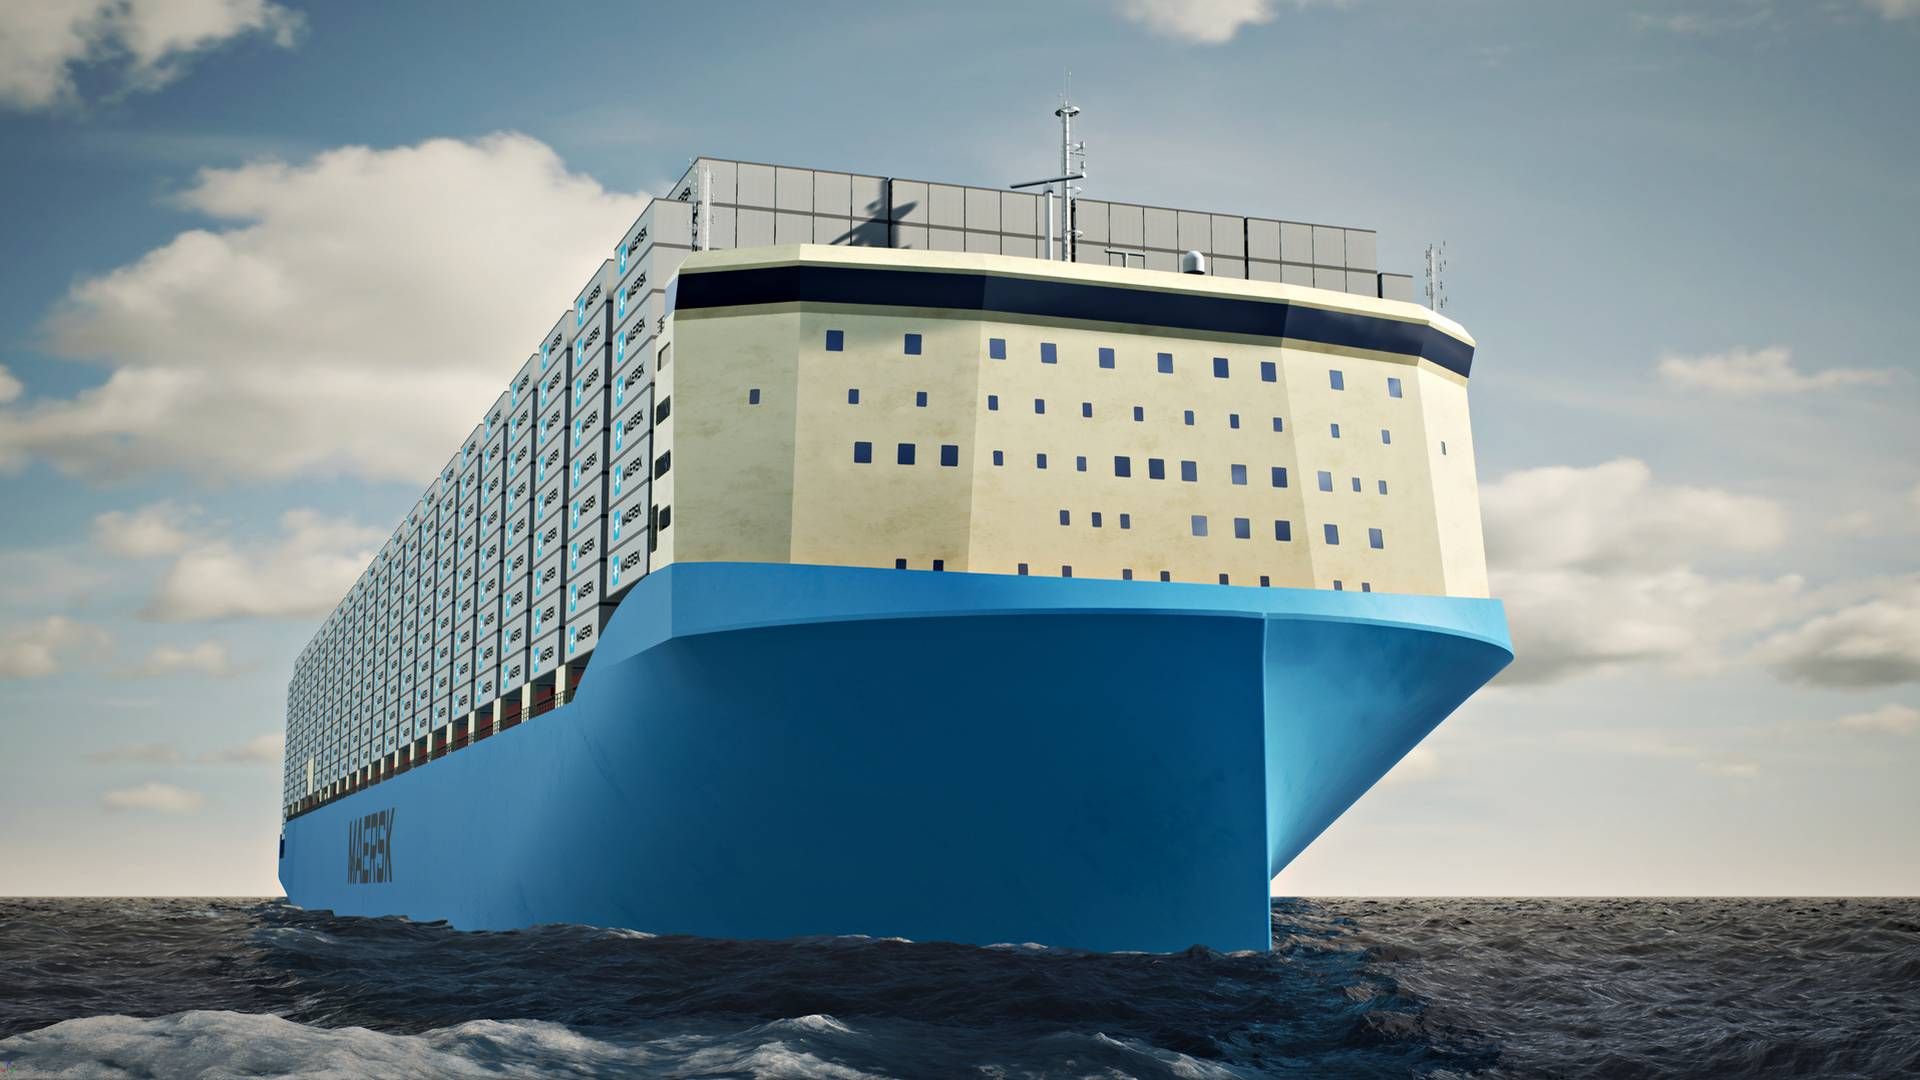 Internally in Maersk, the new ship design is being callled the biggest innovation since the launch of Maersk's 18,000-teu Triple E ships in 2013. | Photo: Maersk